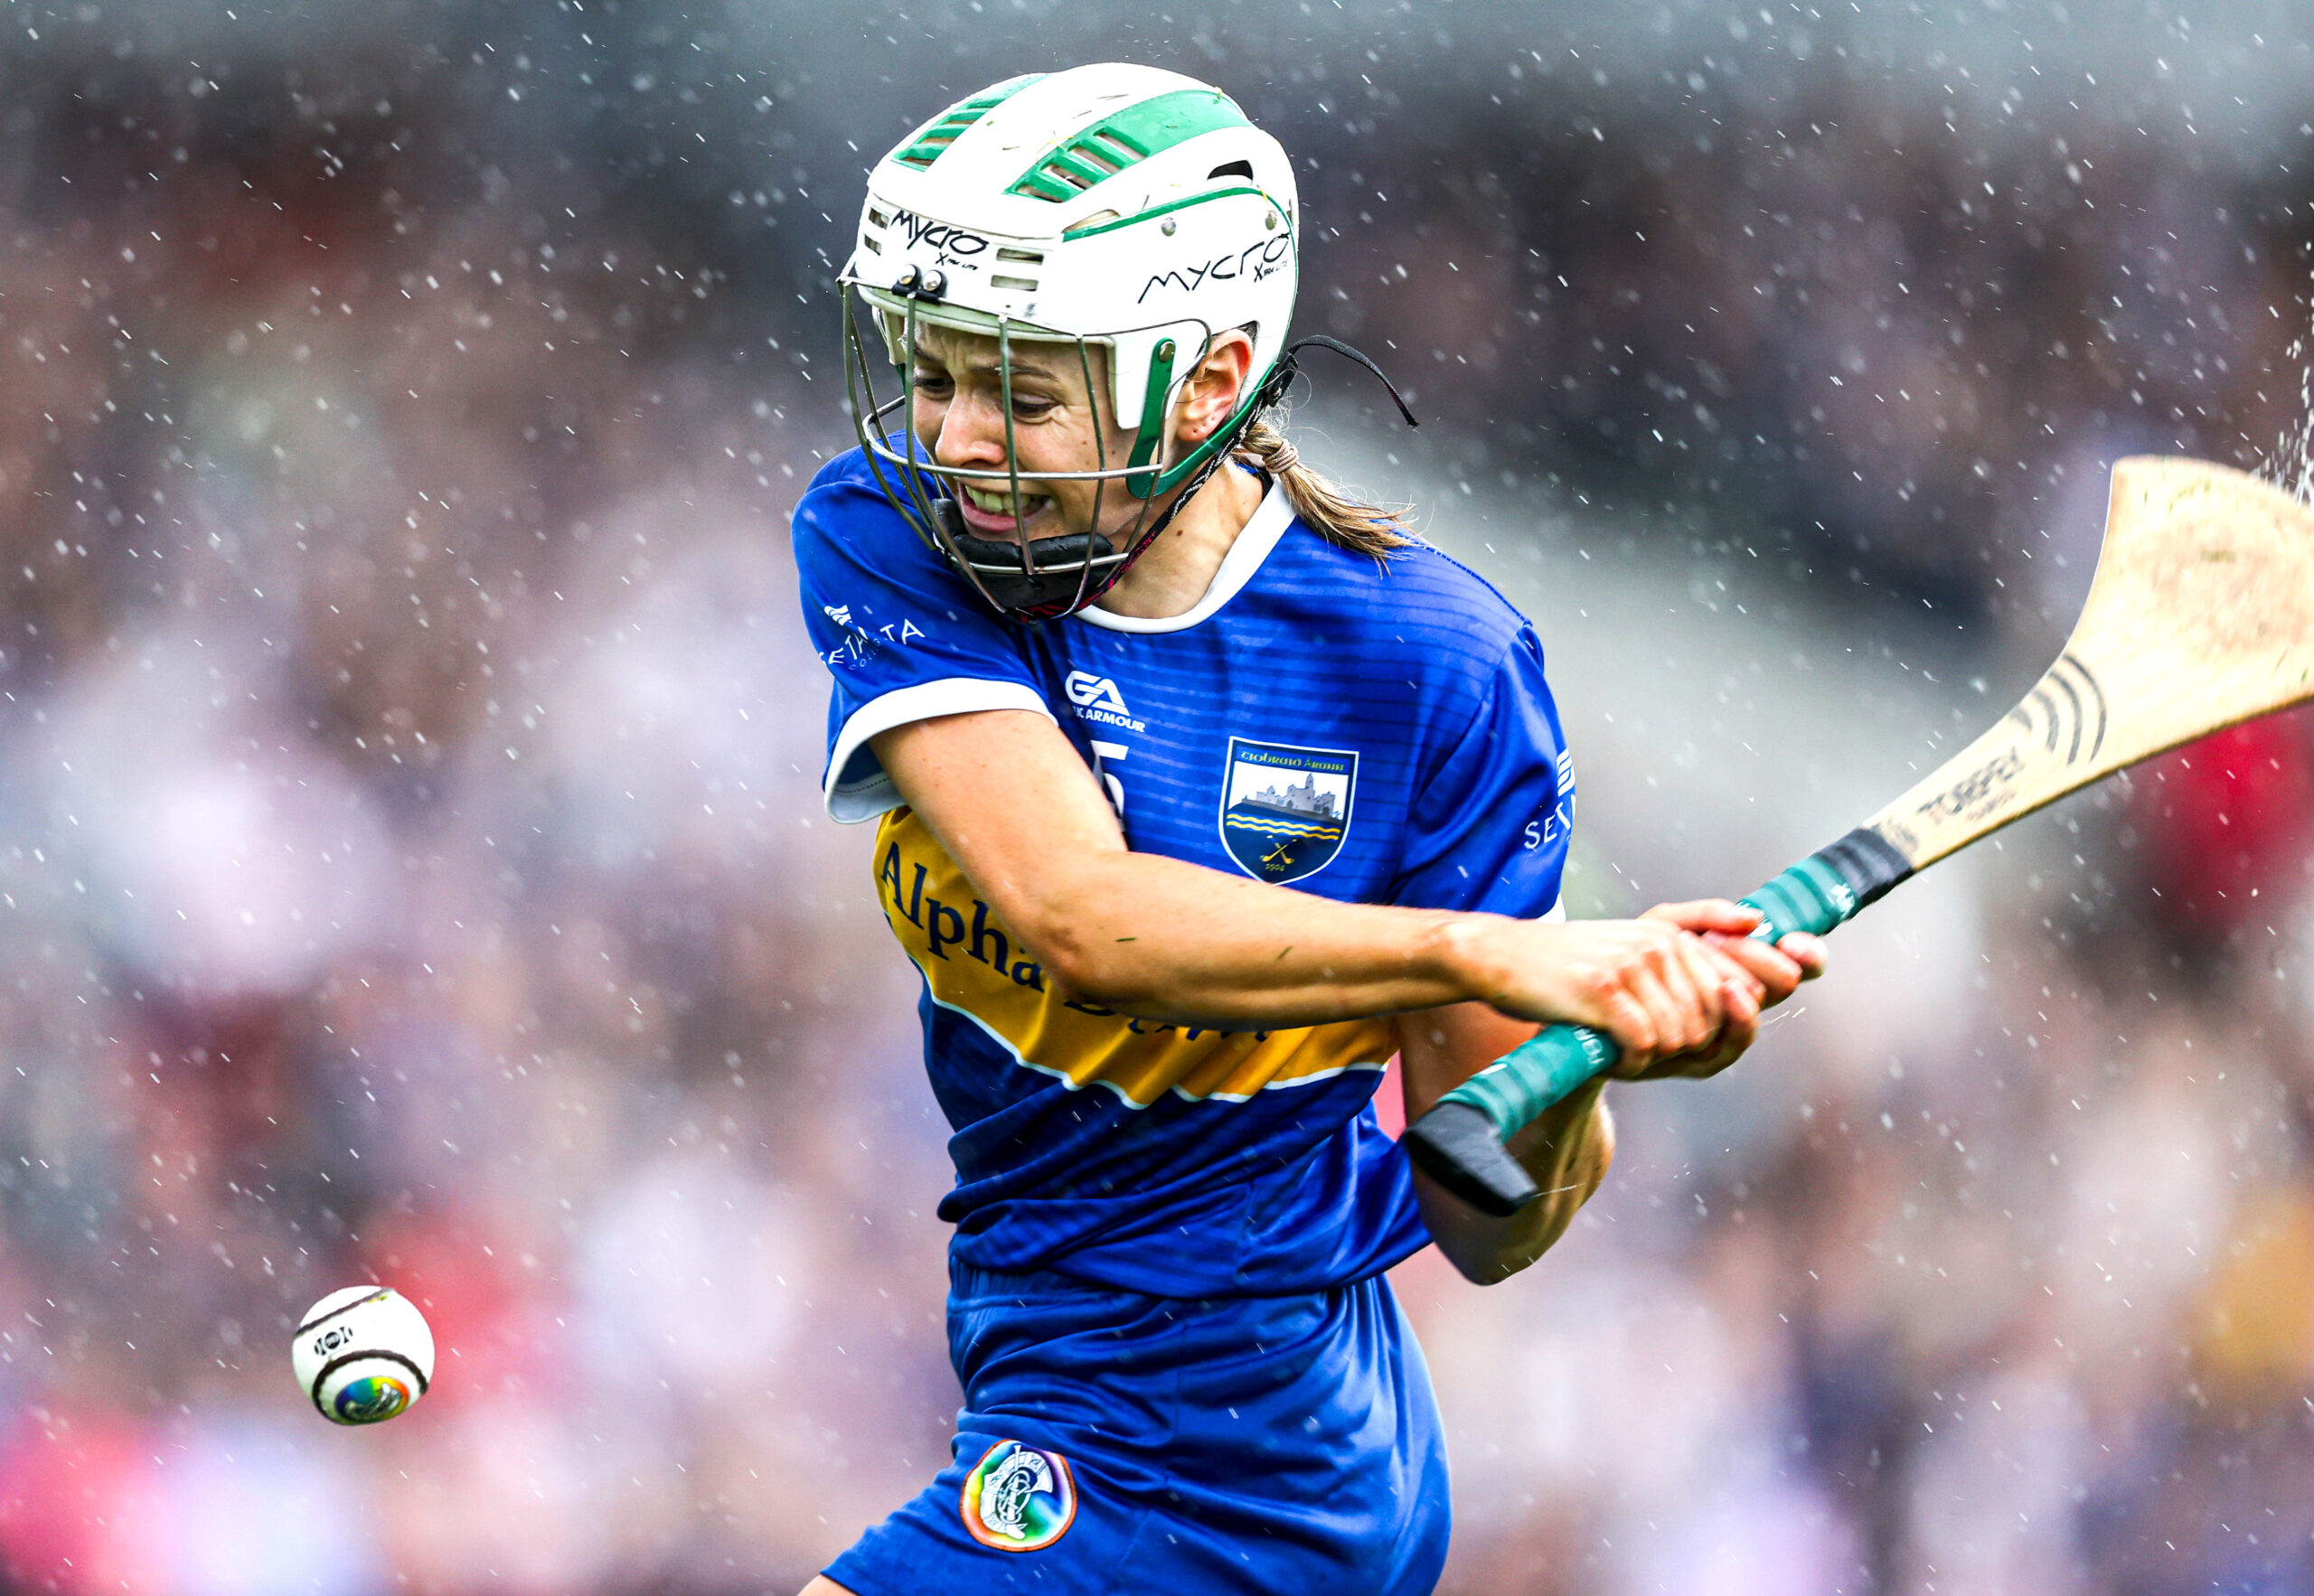 Tipperary’s Clodagh McIntyre – If there’s good communication, you can play in any position on the field